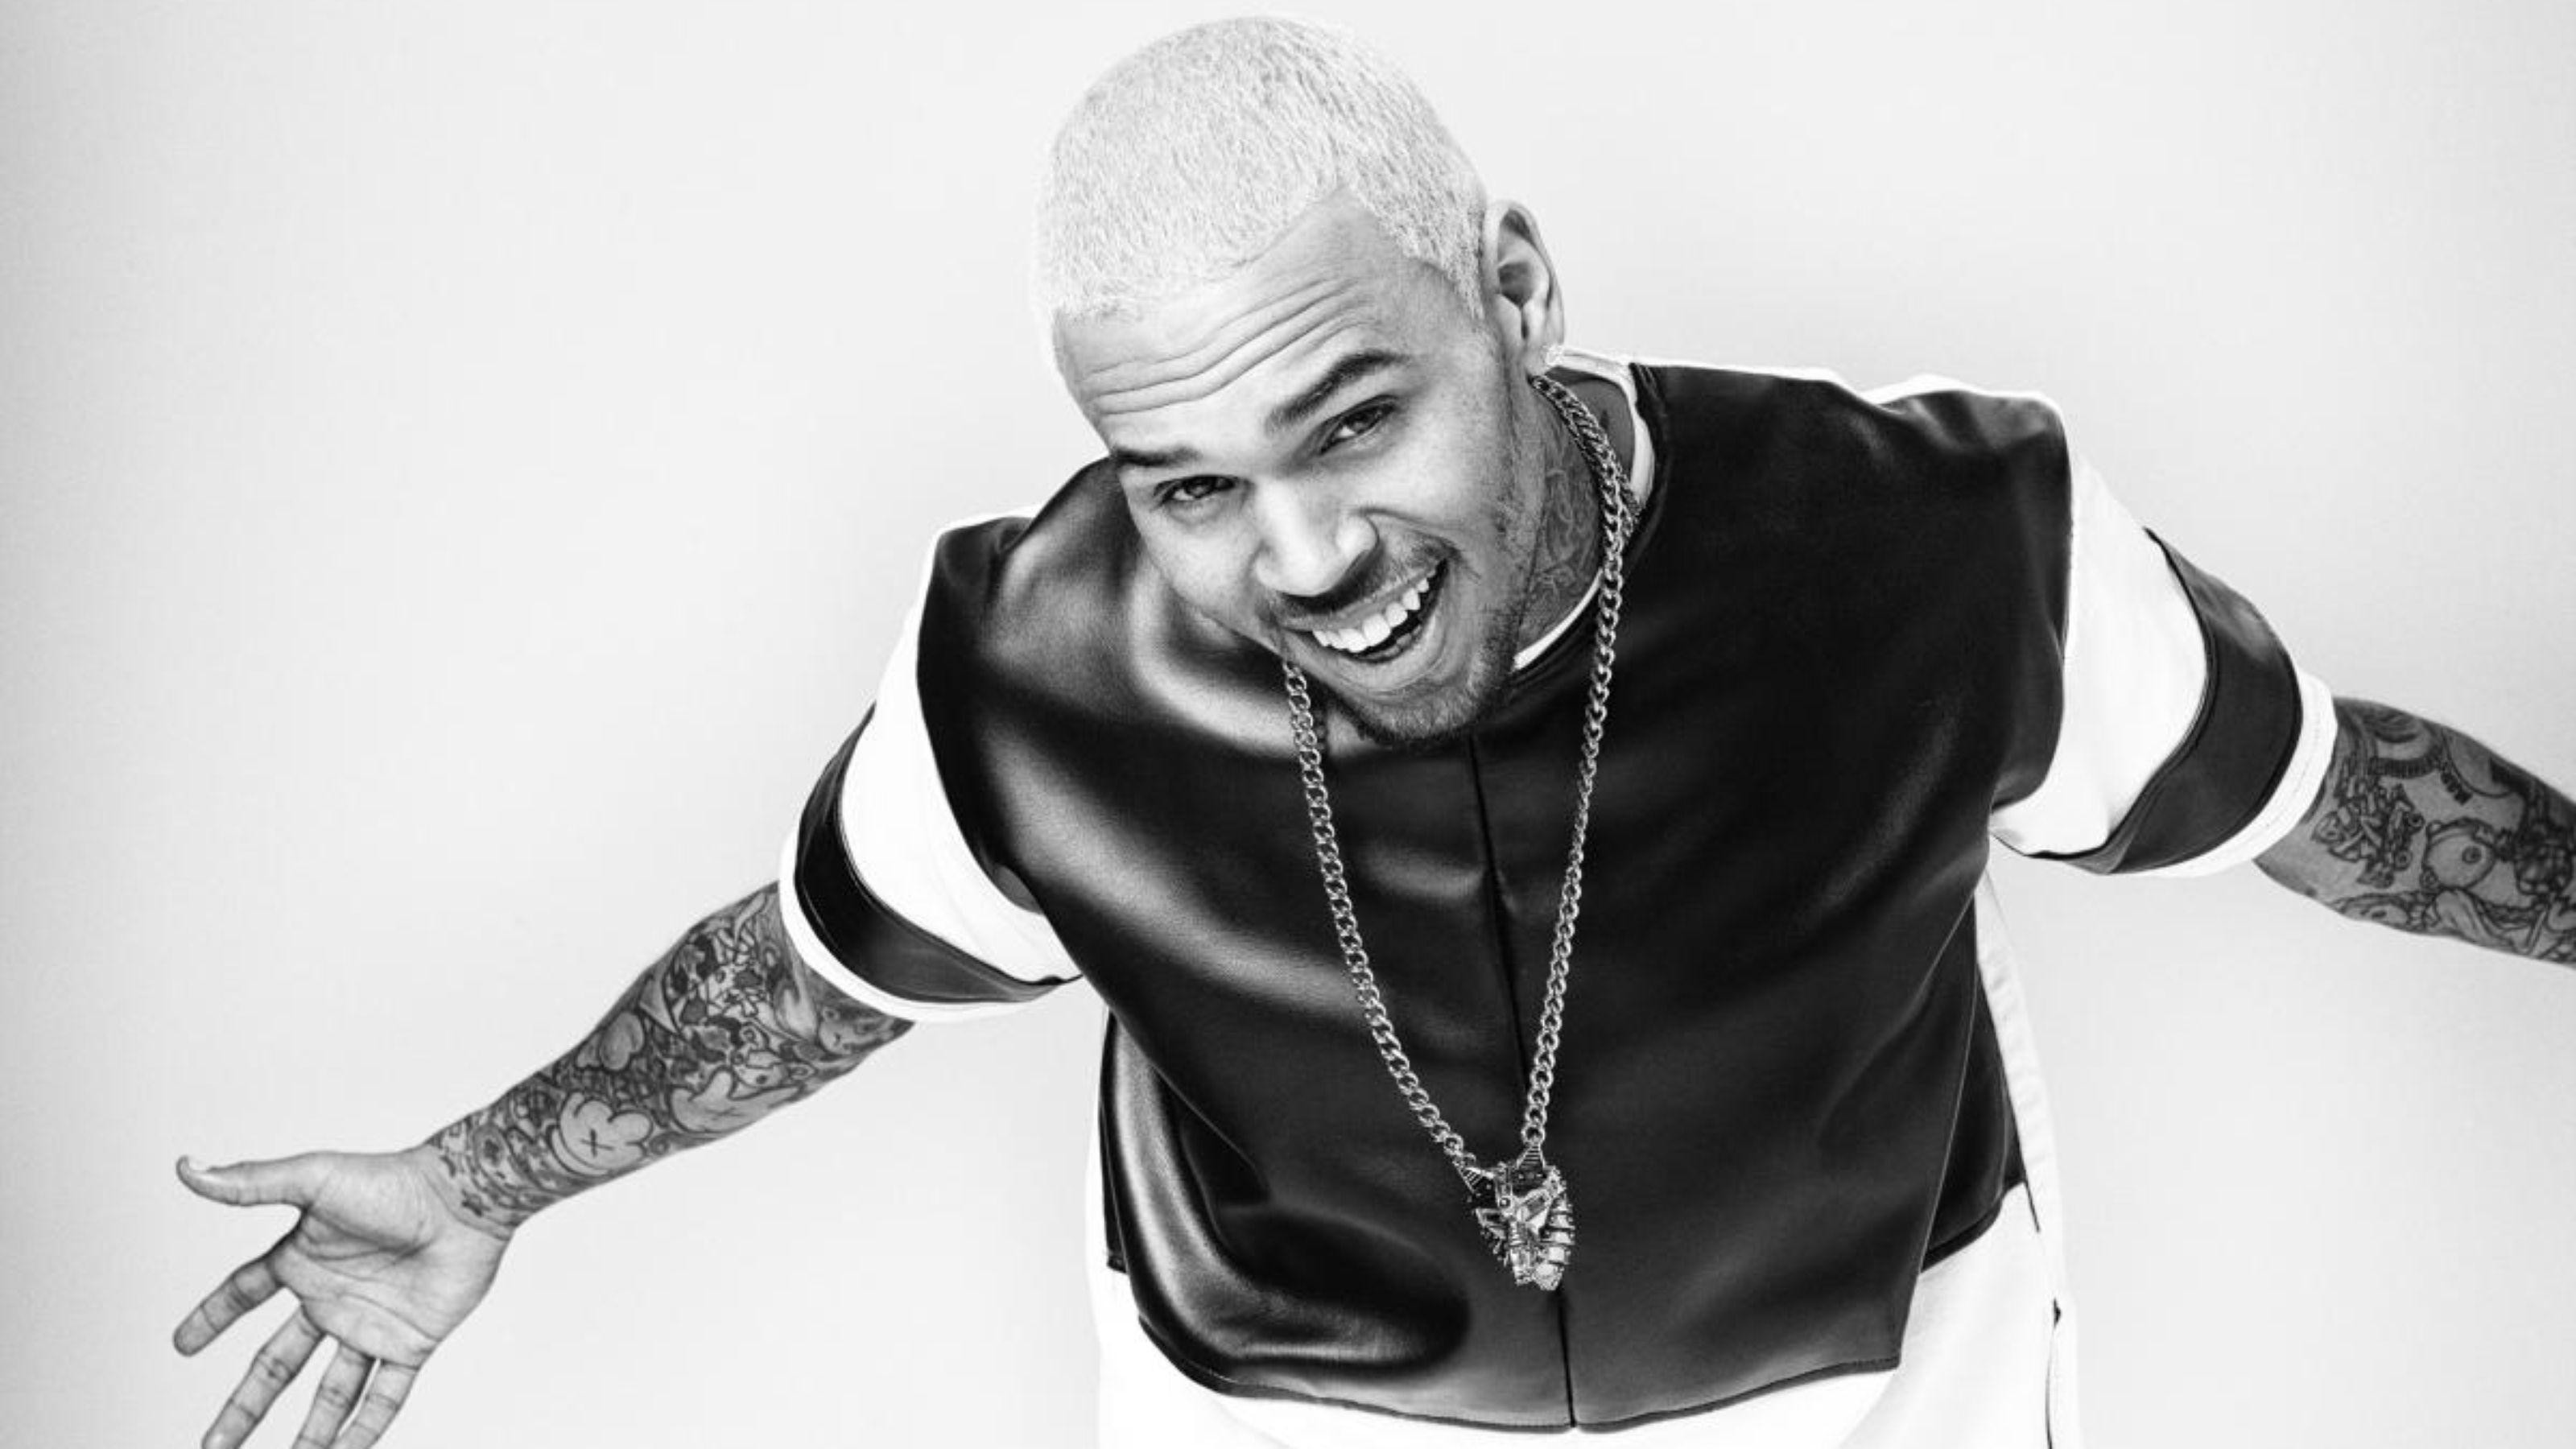 3200x1800 Chris Brown Wallpapers and Pictures Collection (45+)